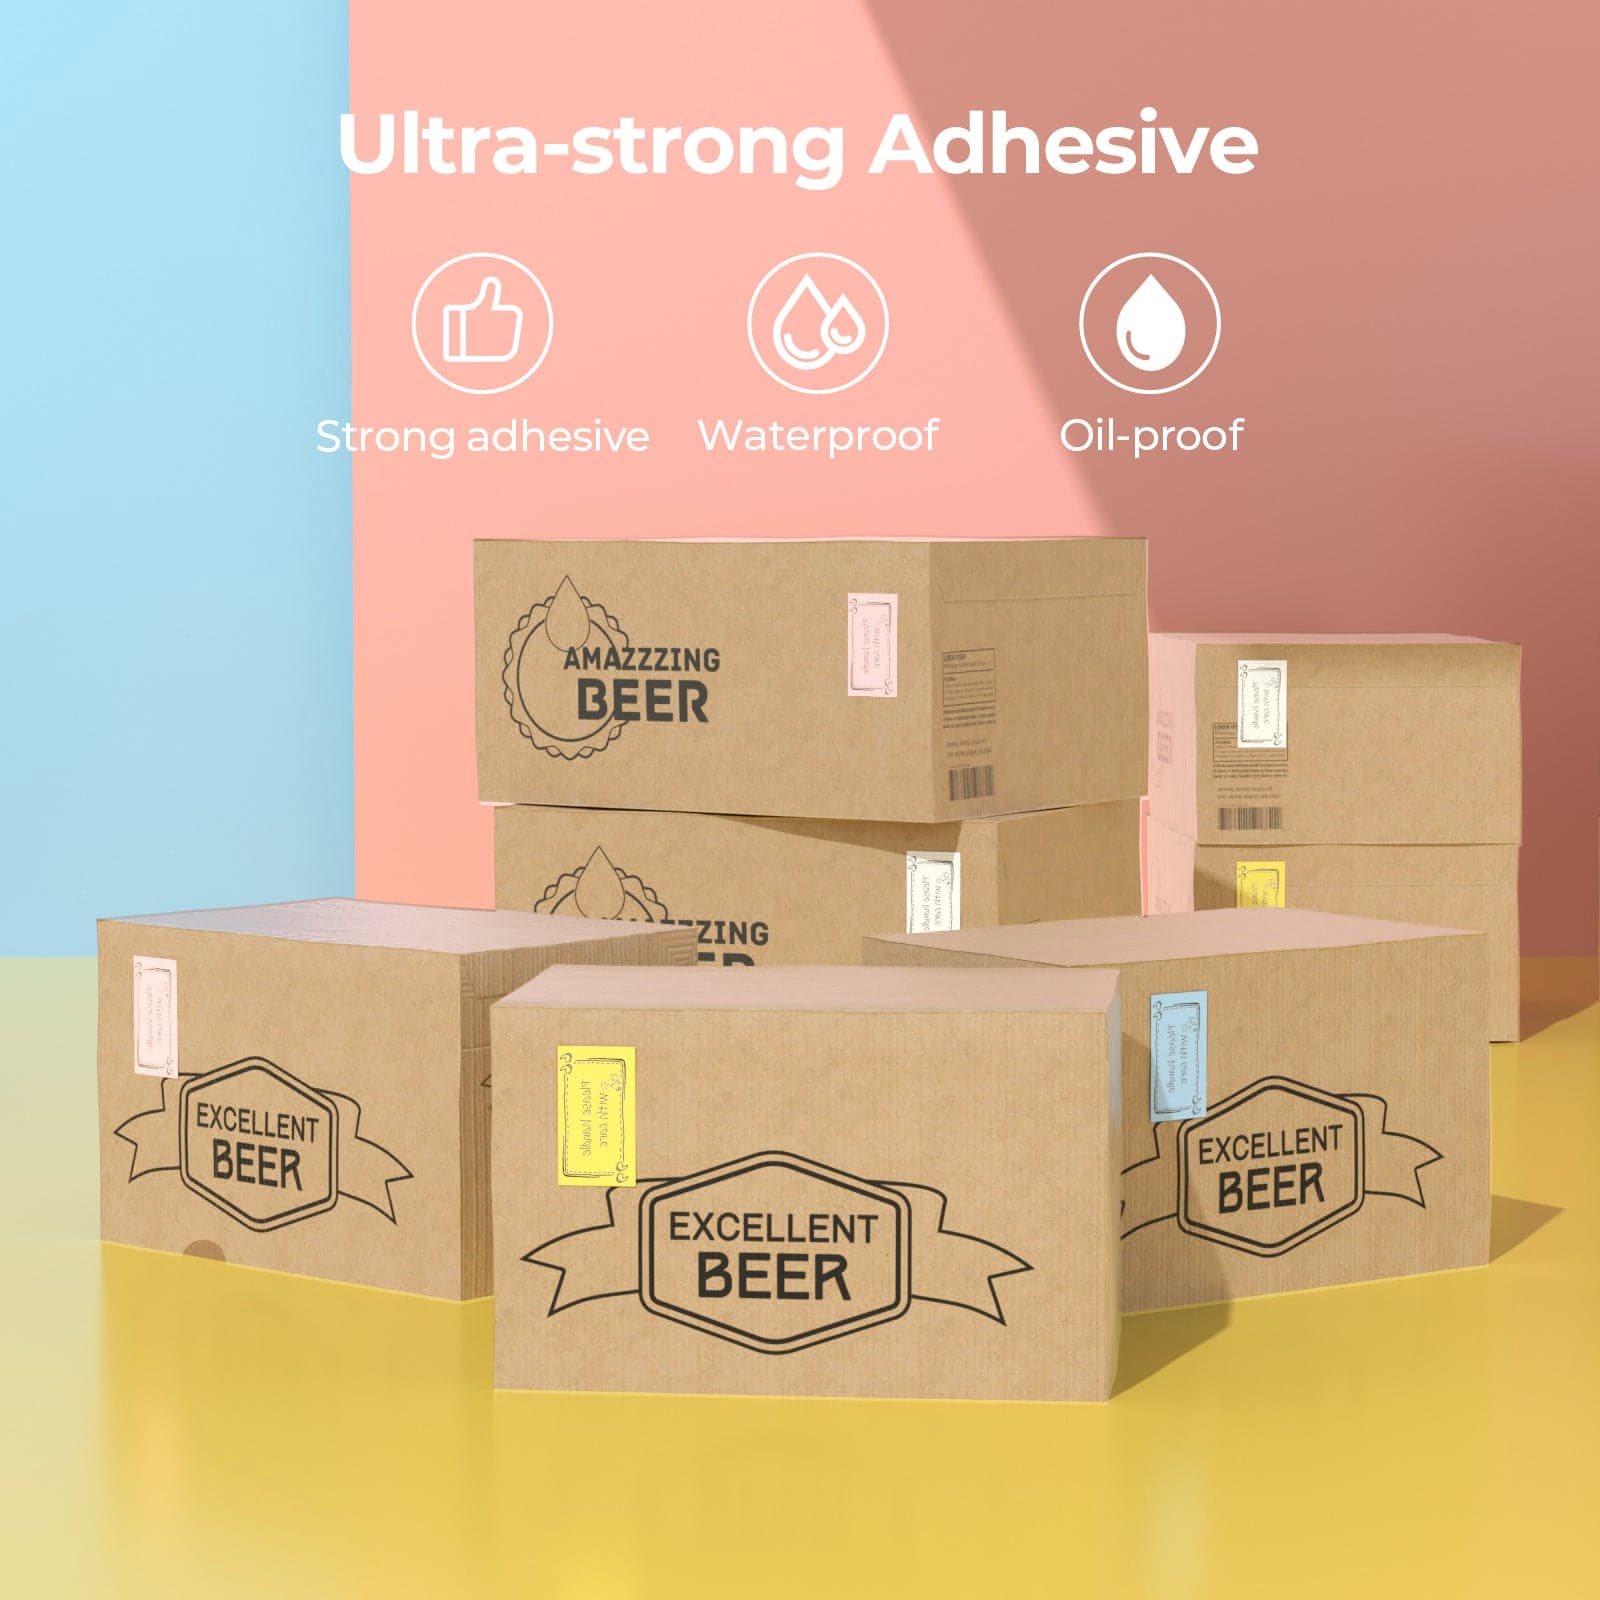 MUNBYN self-adhesive rectangle mailing labels on the packages are waterproof and oil-proof.